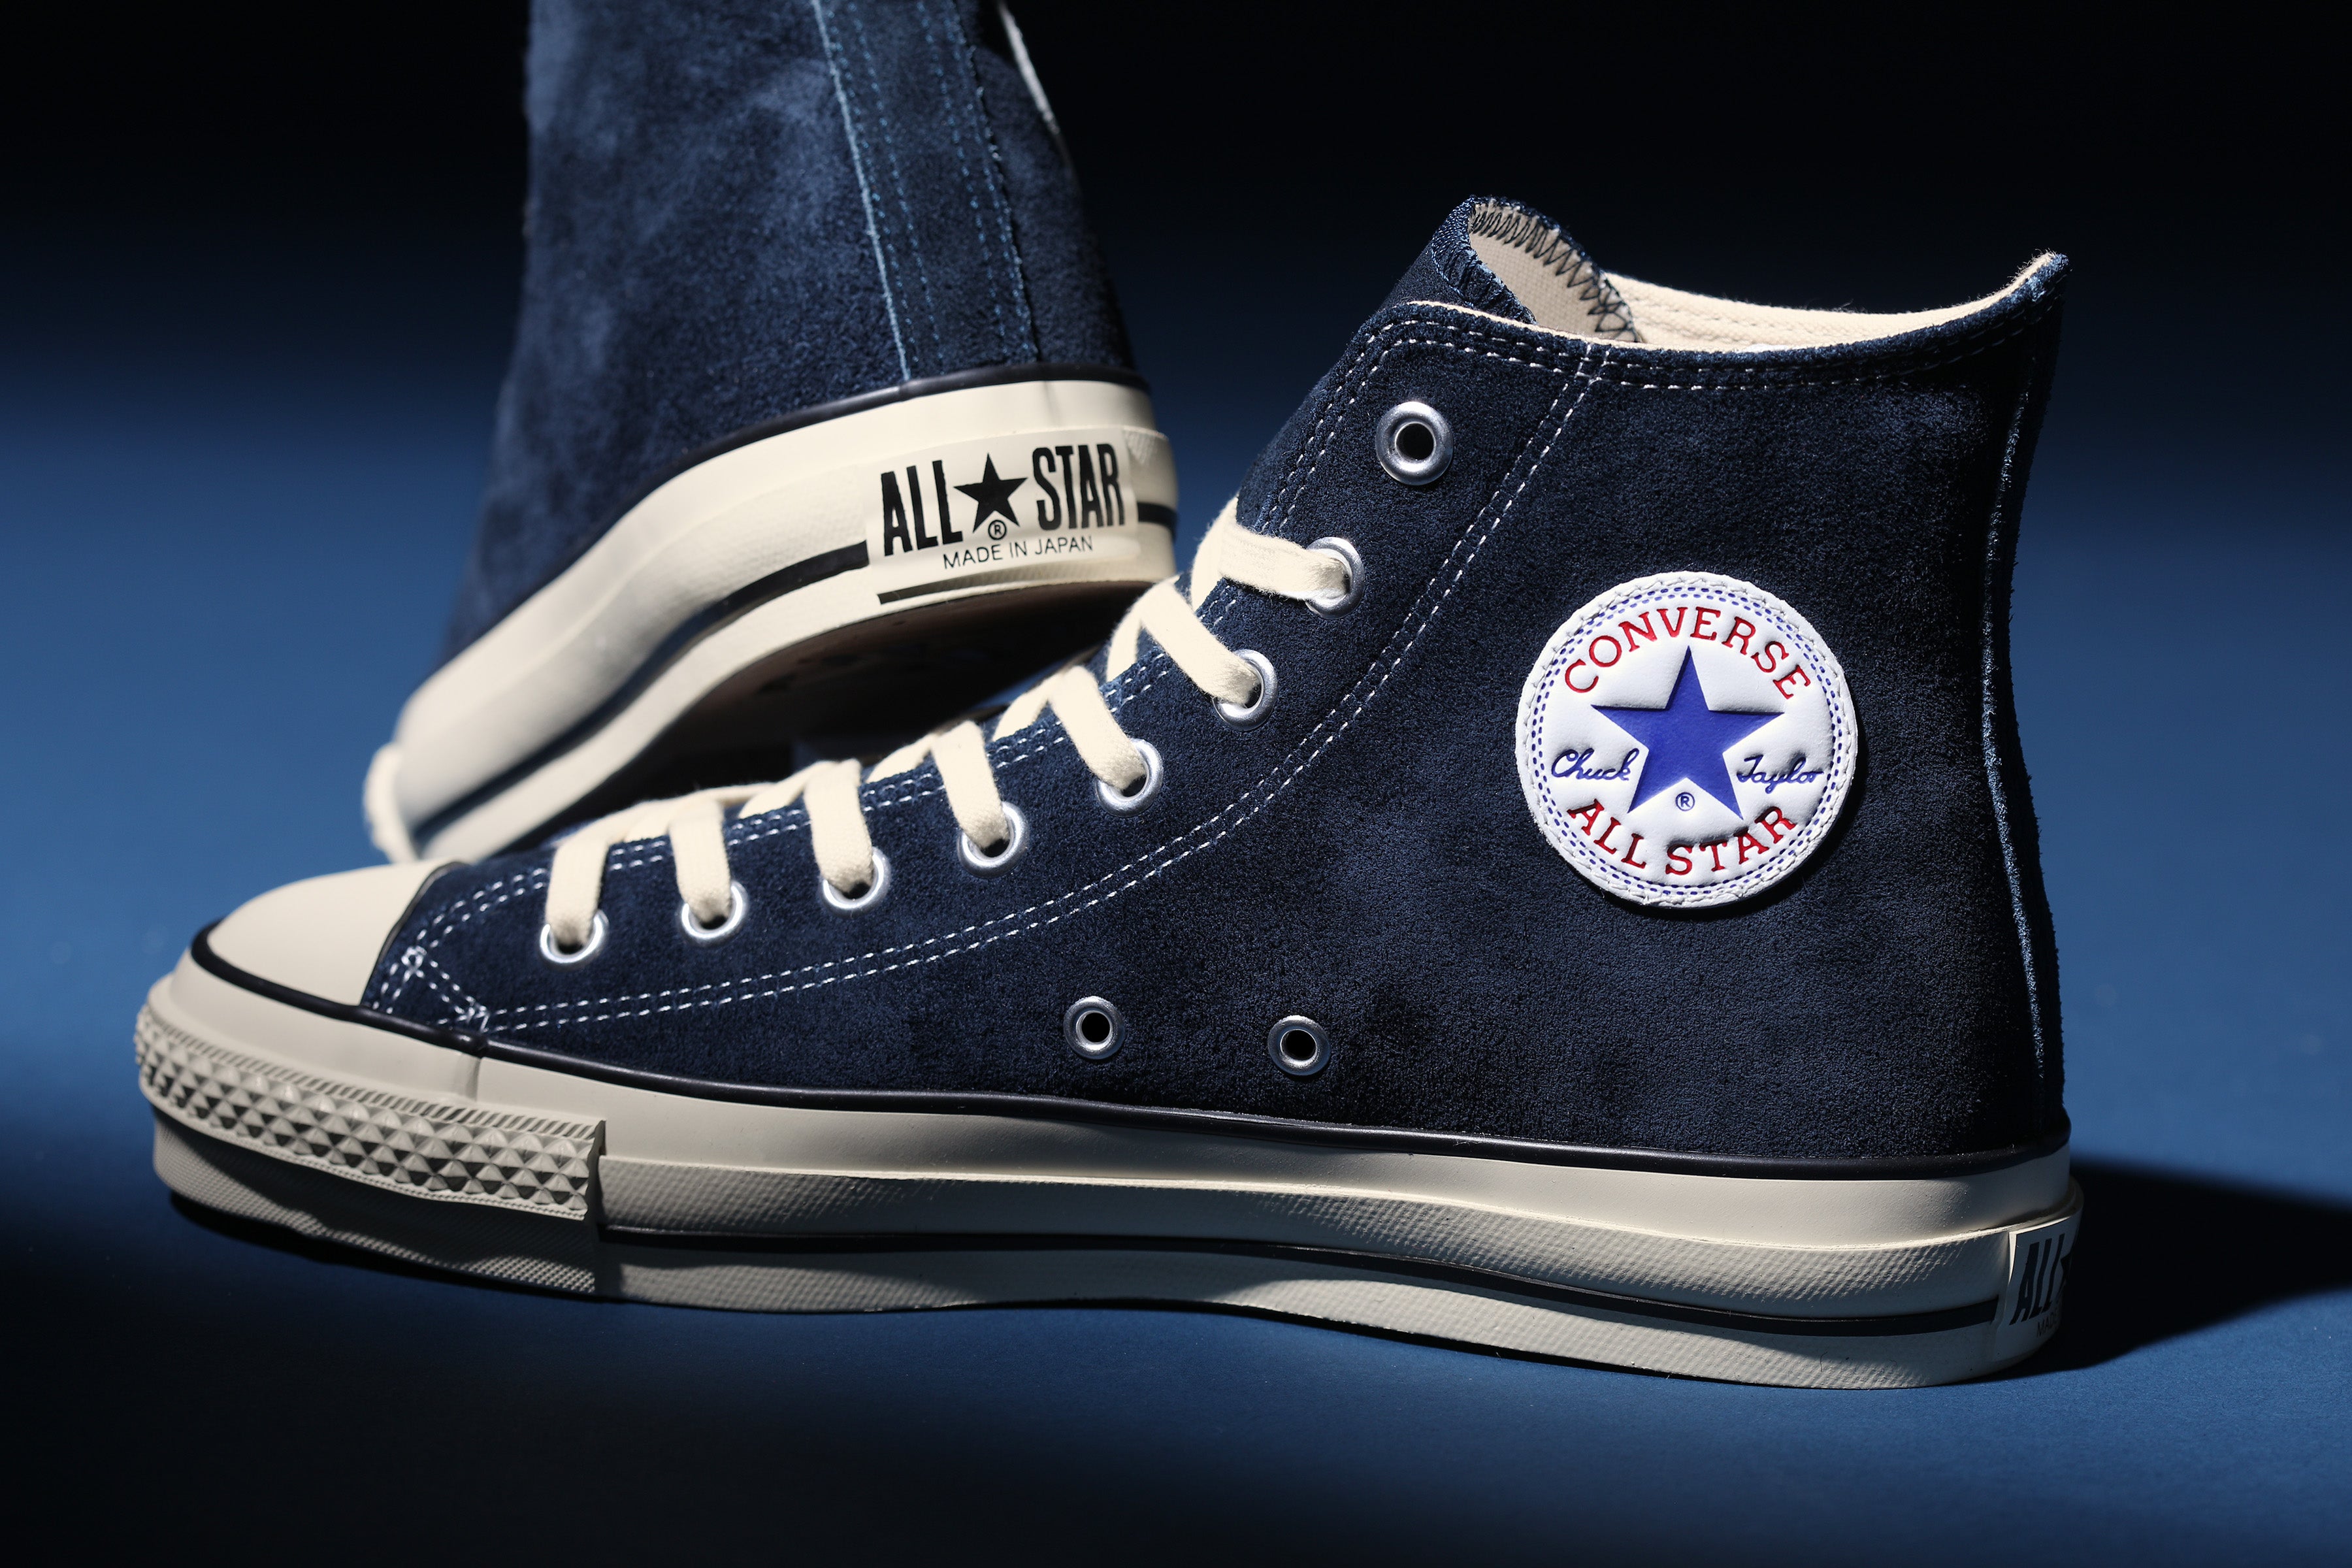 28cm★CONVERSE コンバース 日本製 ALL STAR SUEDE AS J LCLZ OX TOKYO LIMITED EDITION PRODUCTS スエード オールスター ローカライズ グレー size28cm